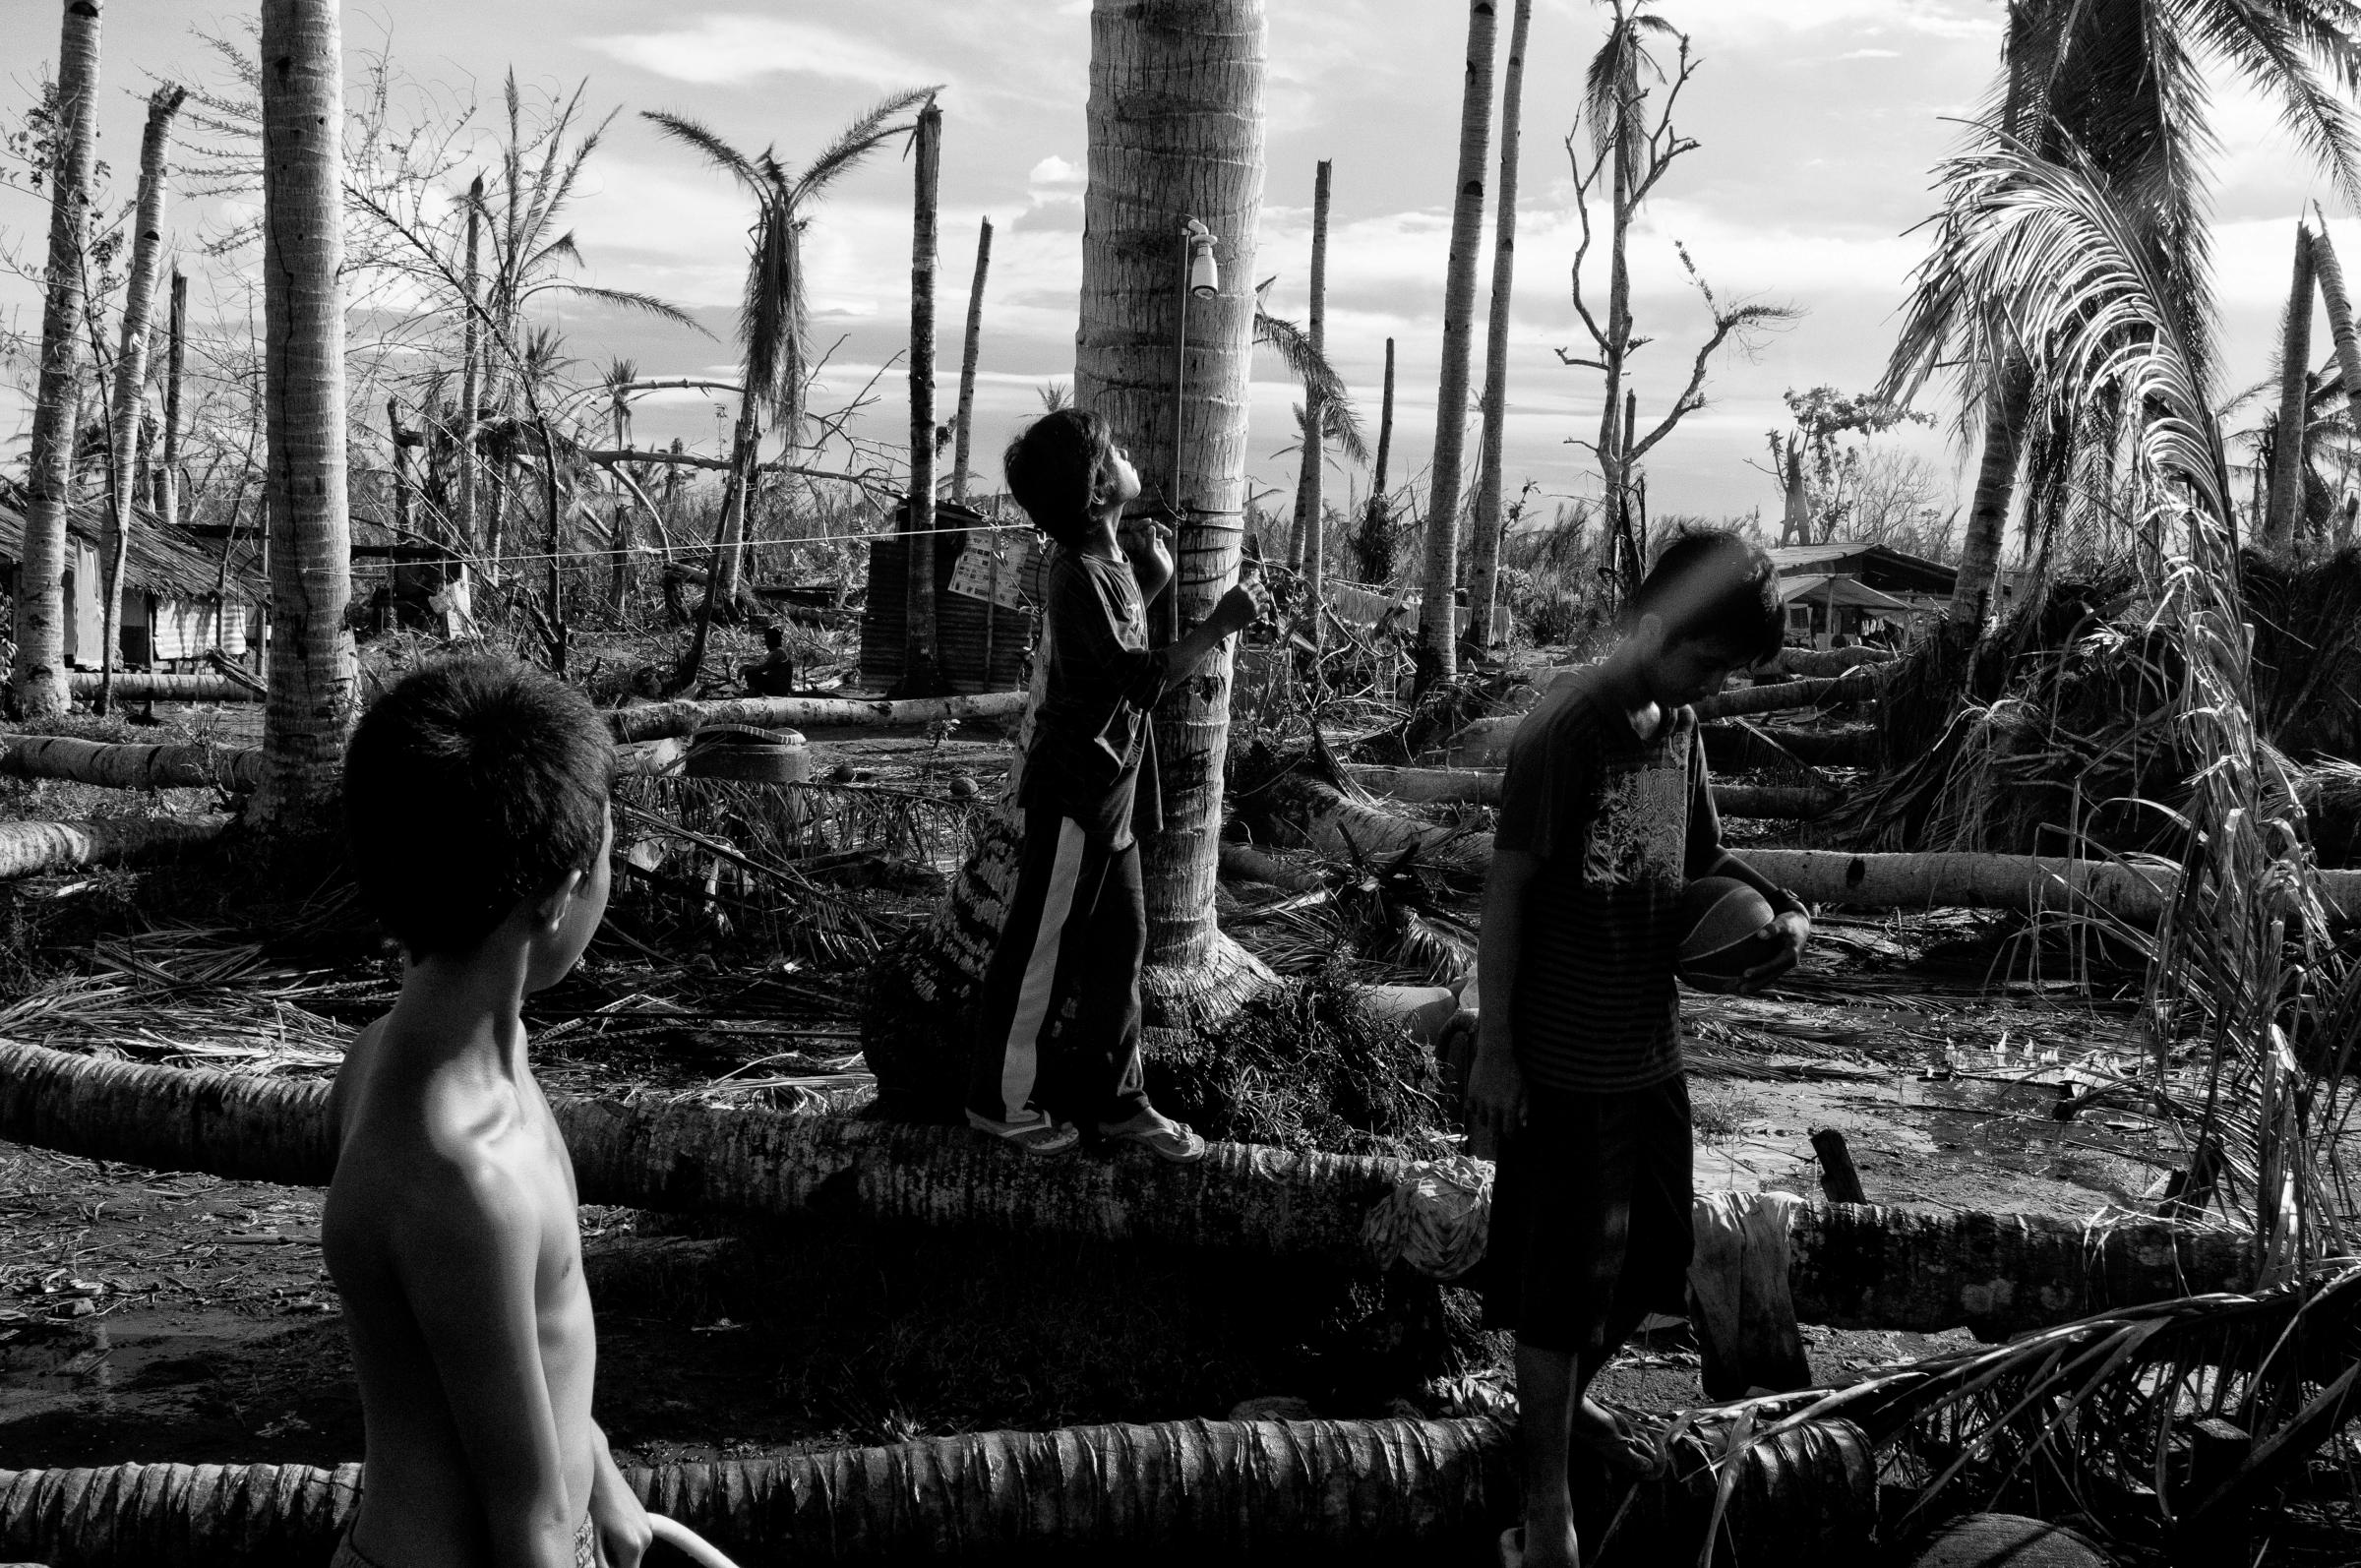 Children play in a damaged village in San Joaquin, Leyte on Dec. 10, 2013.a